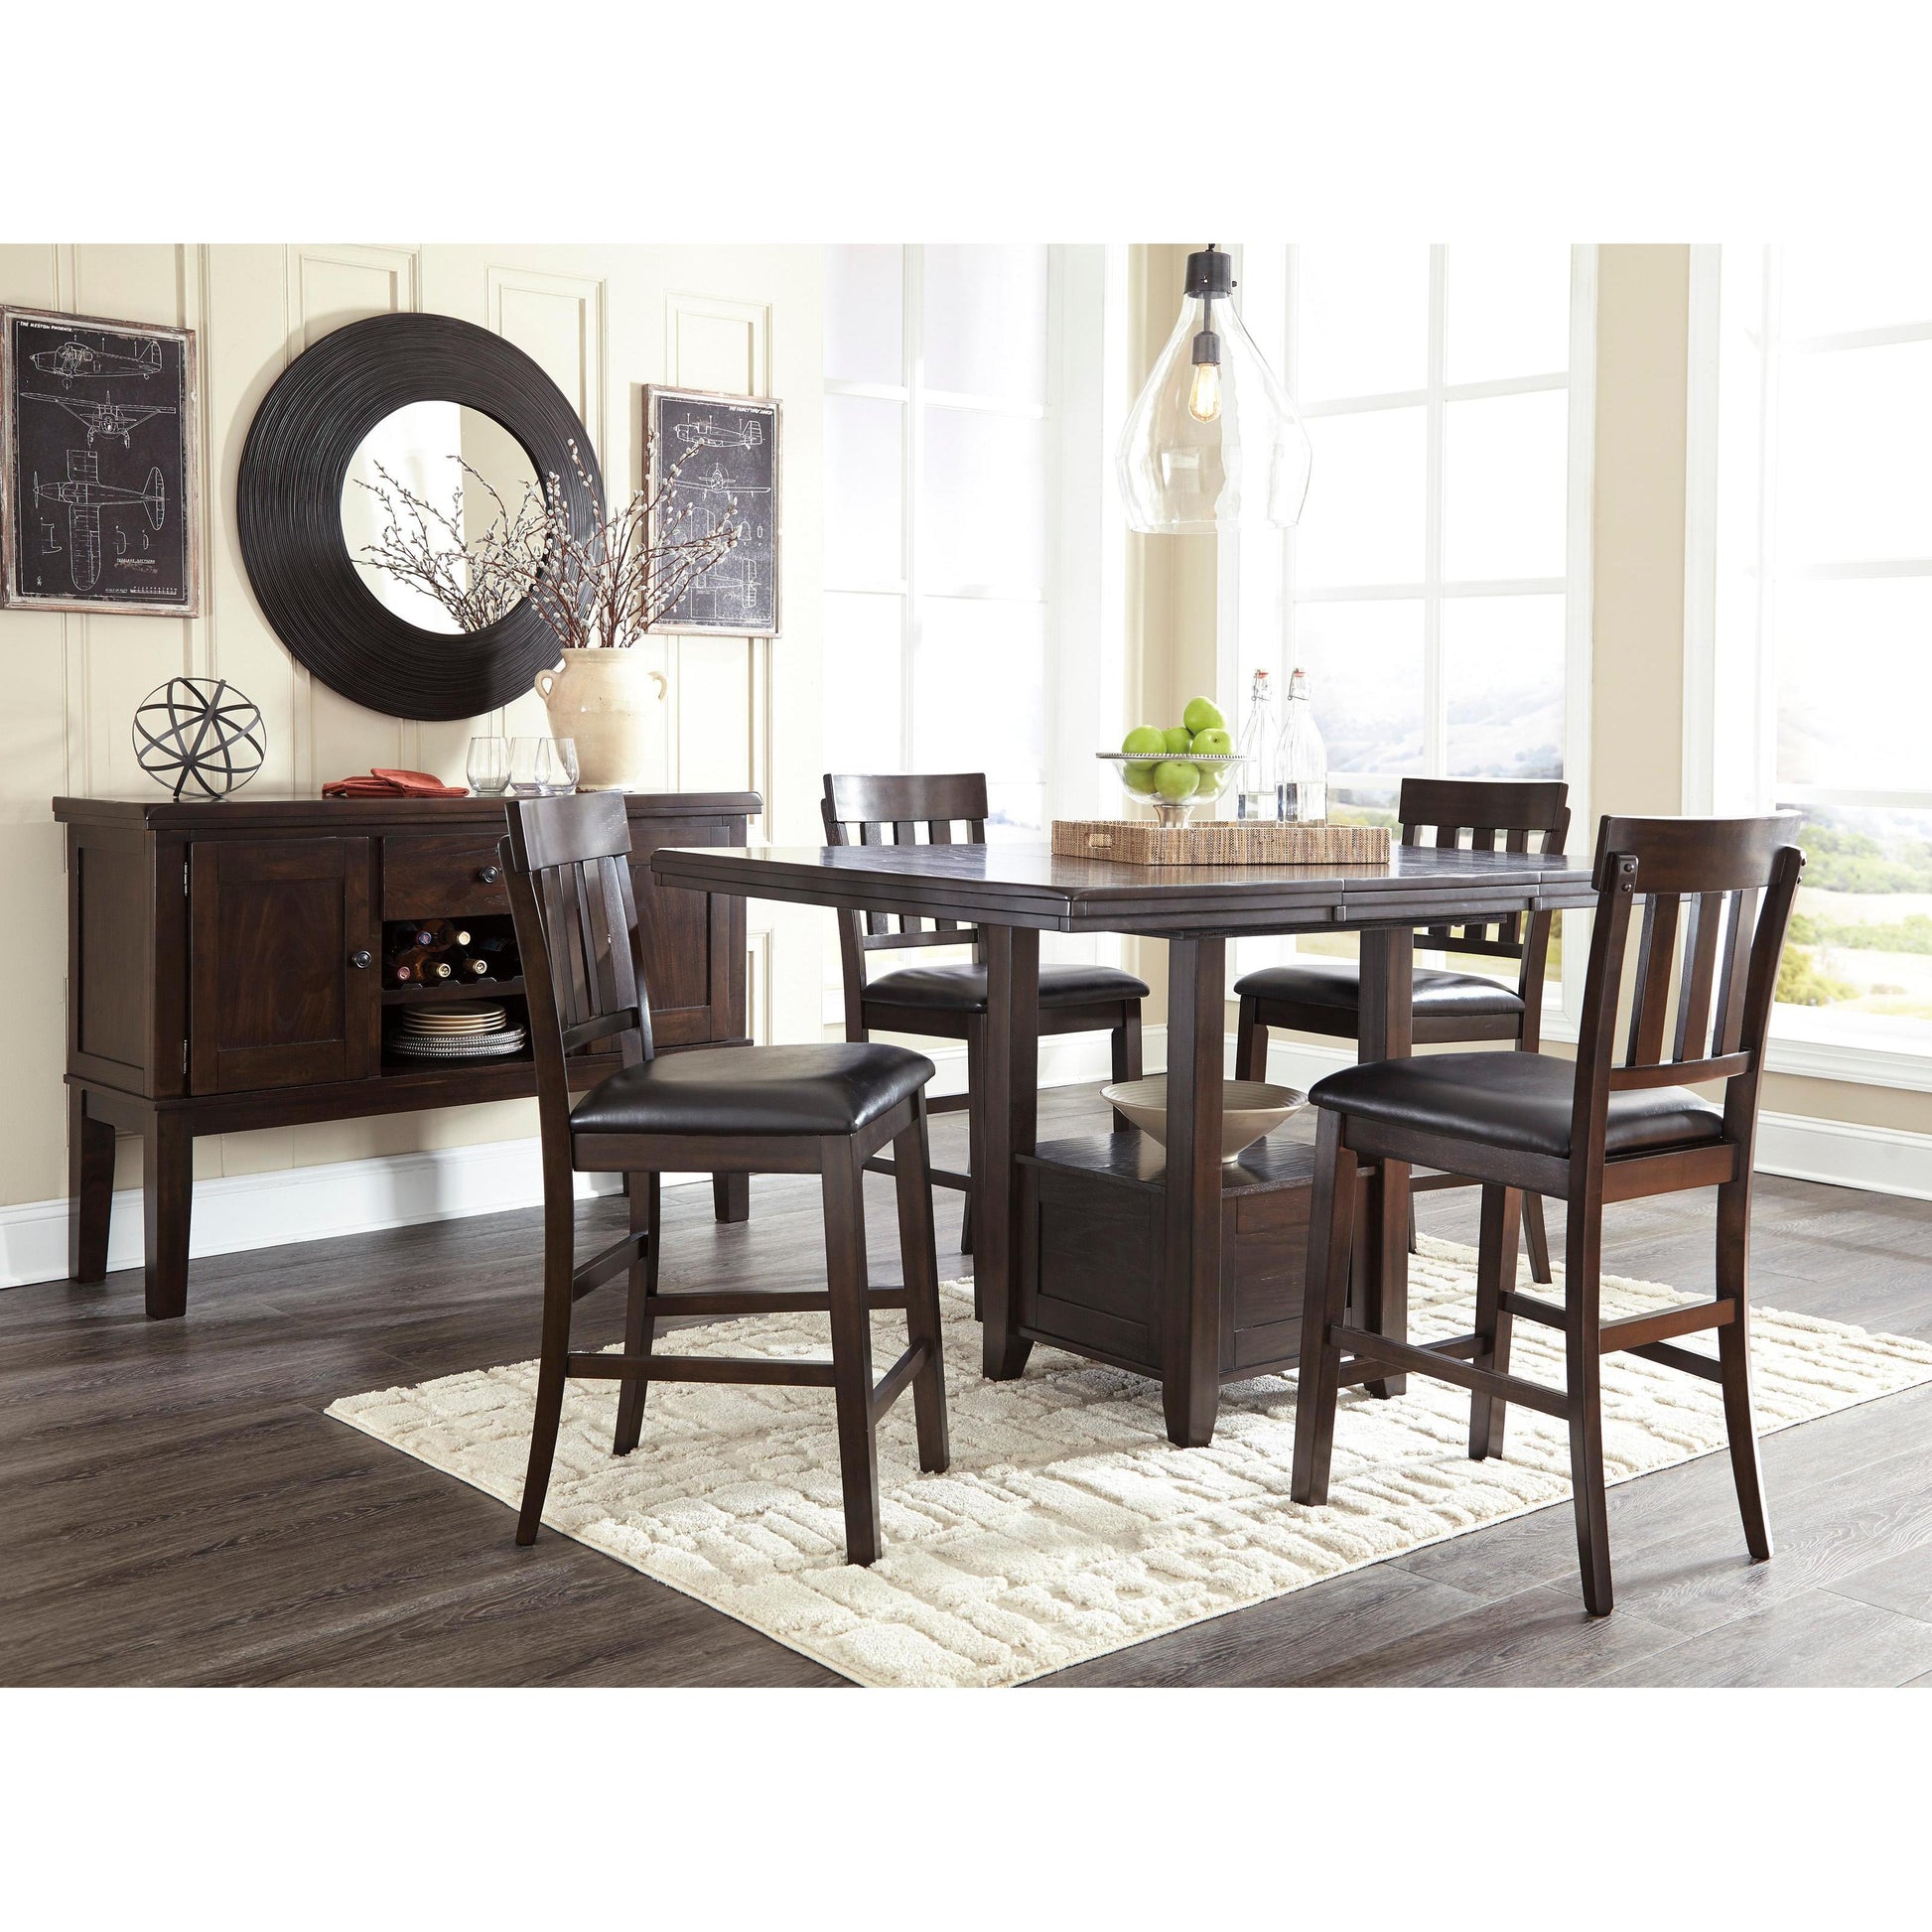 Signature Design by Ashley Haddigan D596D7 7 pc Counter Height Dining Set IMAGE 2